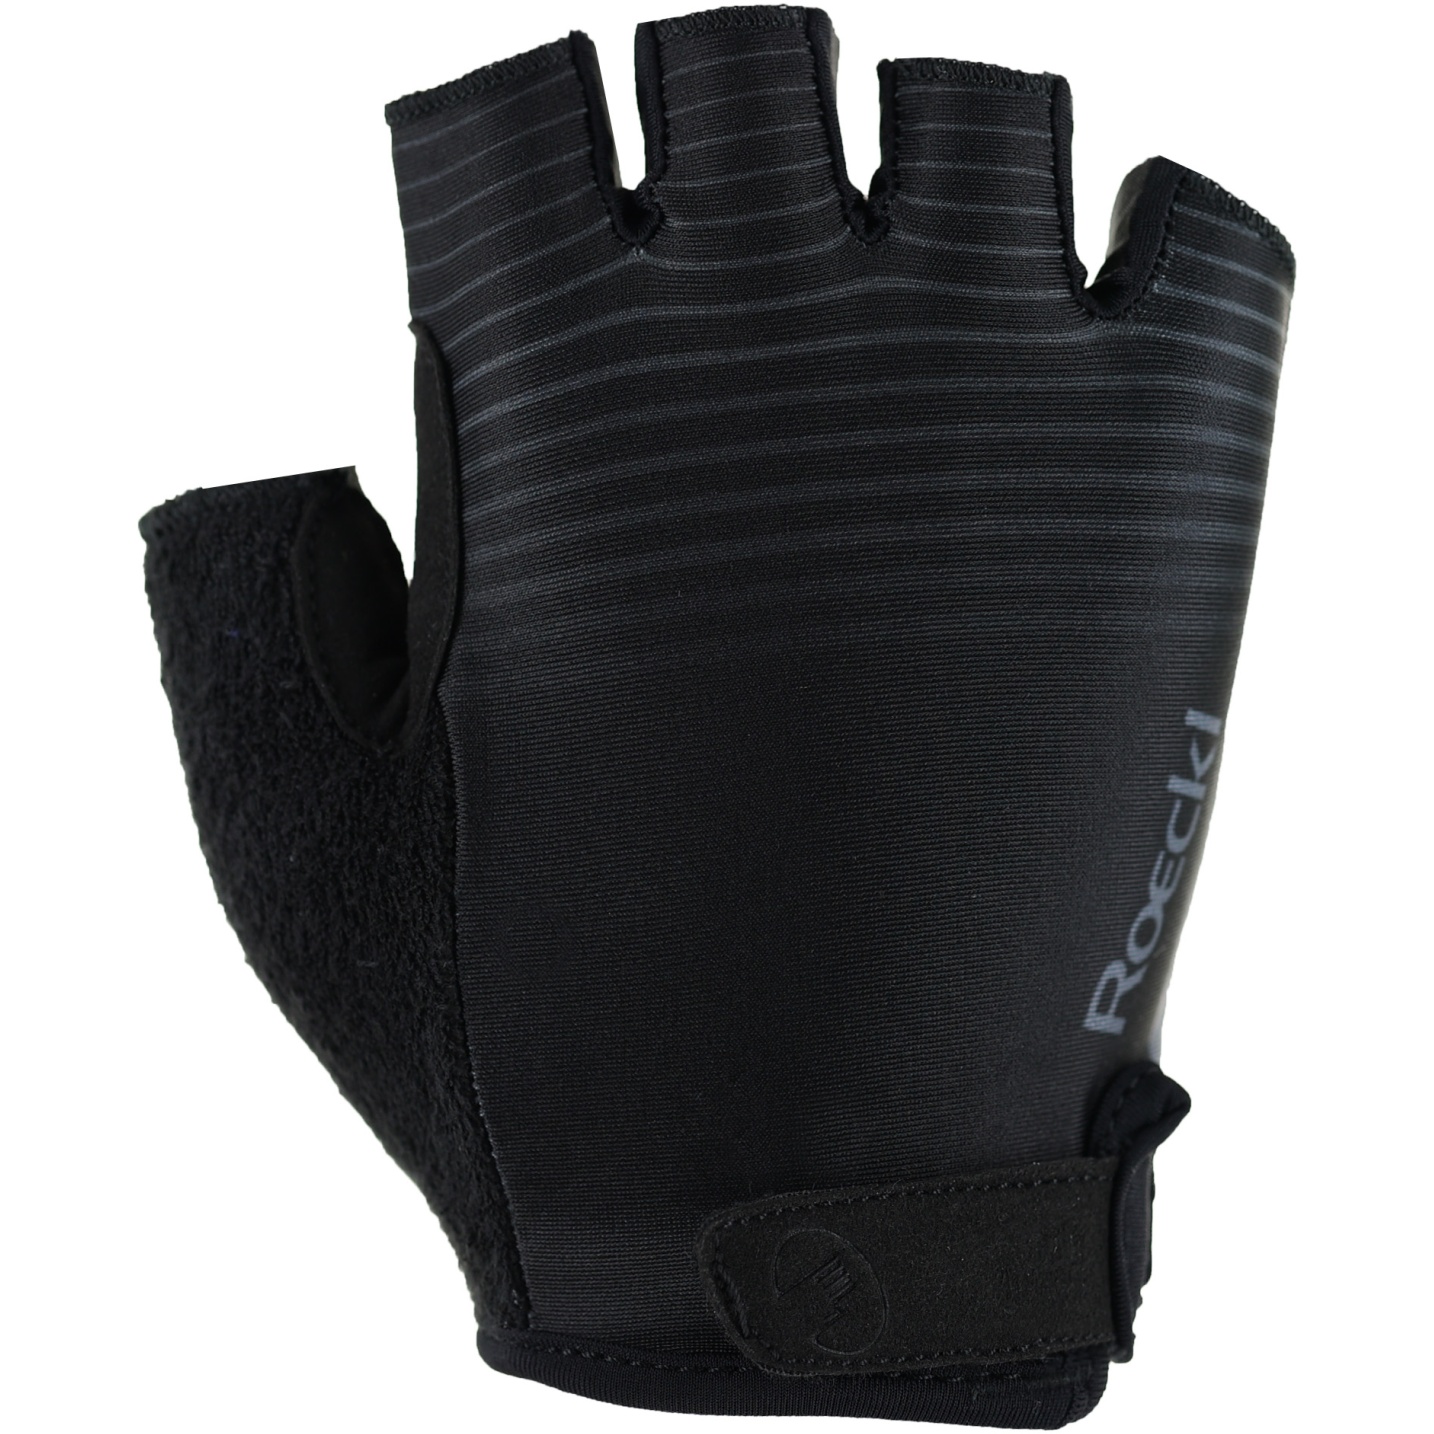 Picture of Roeckl Sports Bernex Cycling Gloves - black shadow 9600